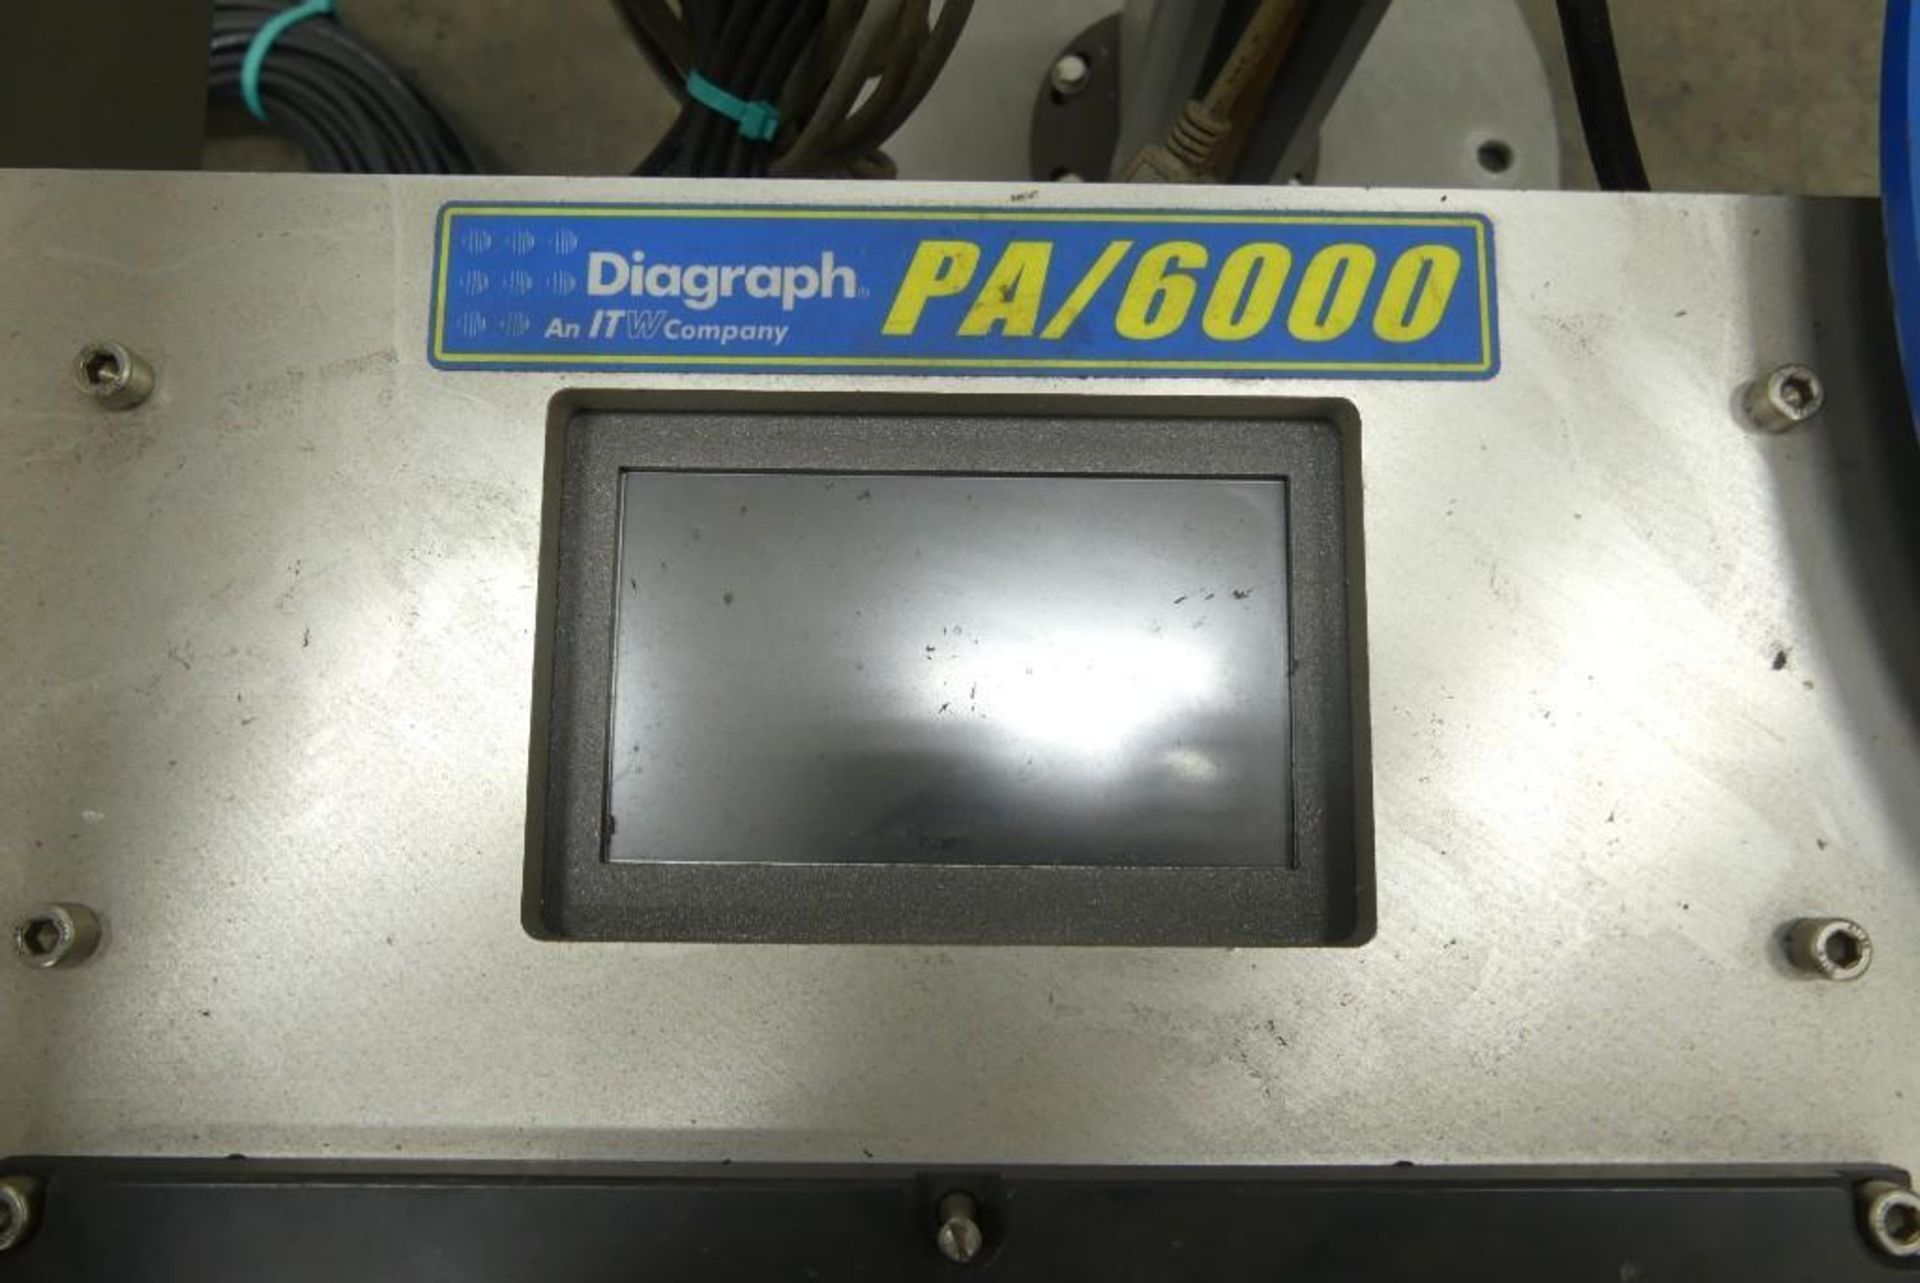 Diagraph PA/6000 Print and Apply Pallet Labeler - Image 4 of 9